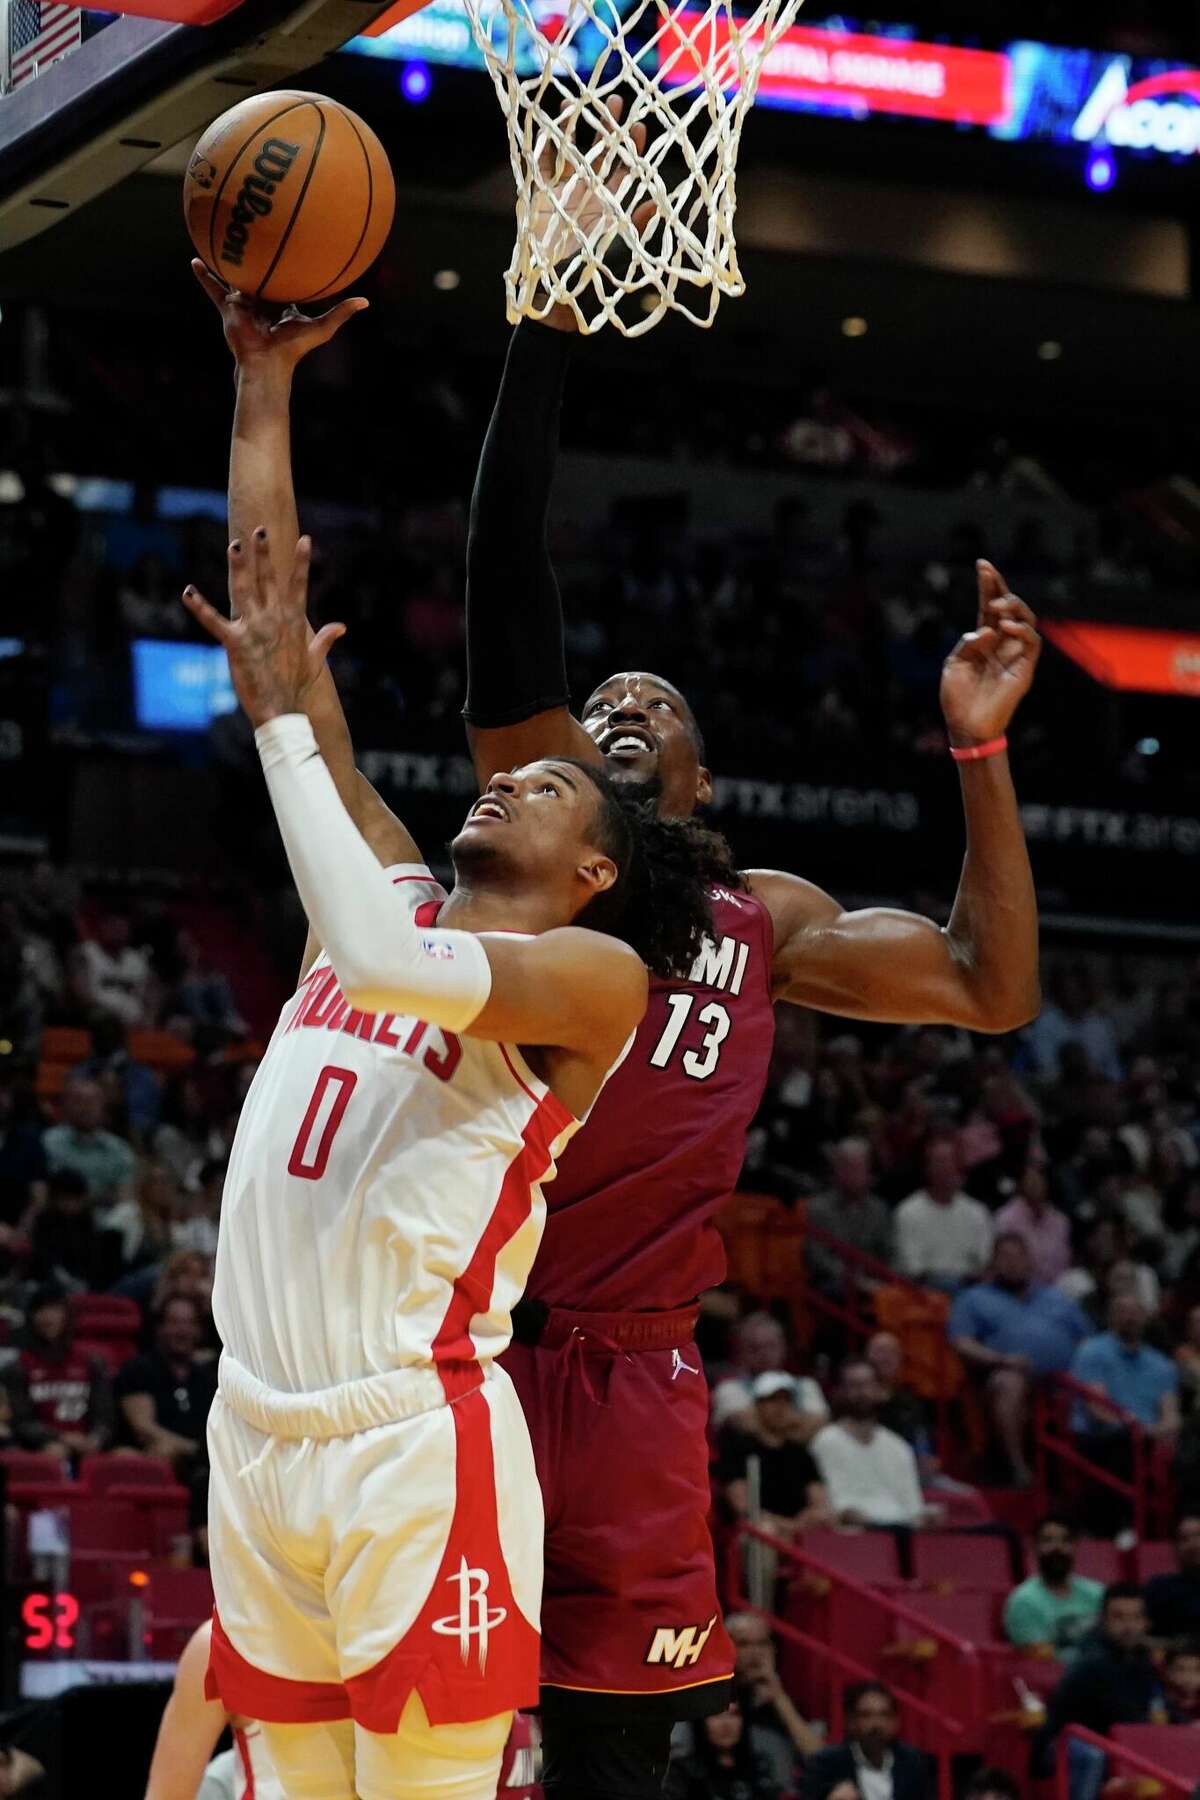 Houston Rockets guard Jalen Green (0) drives to the basket as Miami Heat center Bam Adebayo (13) defends during the first half of an NBA basketball game, Monday, March 7, 2022, in Miami. (AP Photo/Marta Lavandier)